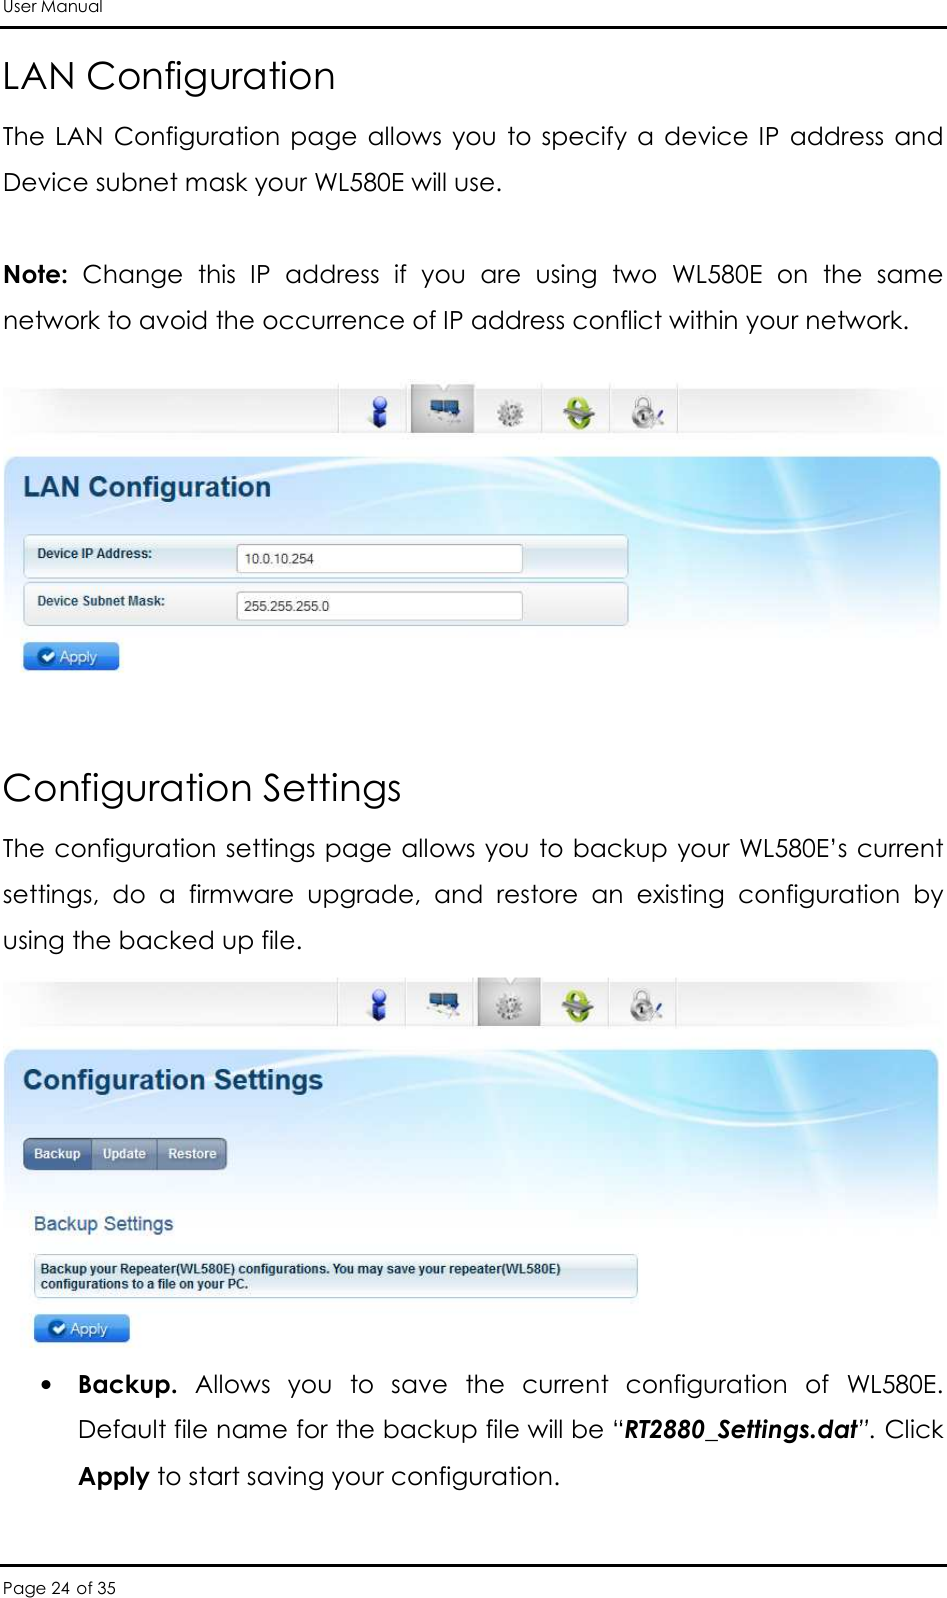 User Manual Page 24 of 35 LAN Configuration The LAN  Configuration  page  allows  you  to specify  a  device  IP  address and Device subnet mask your WL580E will use.   Note:  Change  this  IP  address  if  you  are  using  two  WL580E  on  the  same network to avoid the occurrence of IP address conflict within your network.     Configuration Settings  The configuration settings page allows you to backup your WL580E’s current settings,  do  a  firmware  upgrade,  and  restore  an  existing  configuration  by using the backed up file.   • Backup.  Allows  you  to  save  the  current  configuration  of  WL580E. Default file name for the backup file will be “RT2880_Settings.dat”. Click Apply to start saving your configuration.  